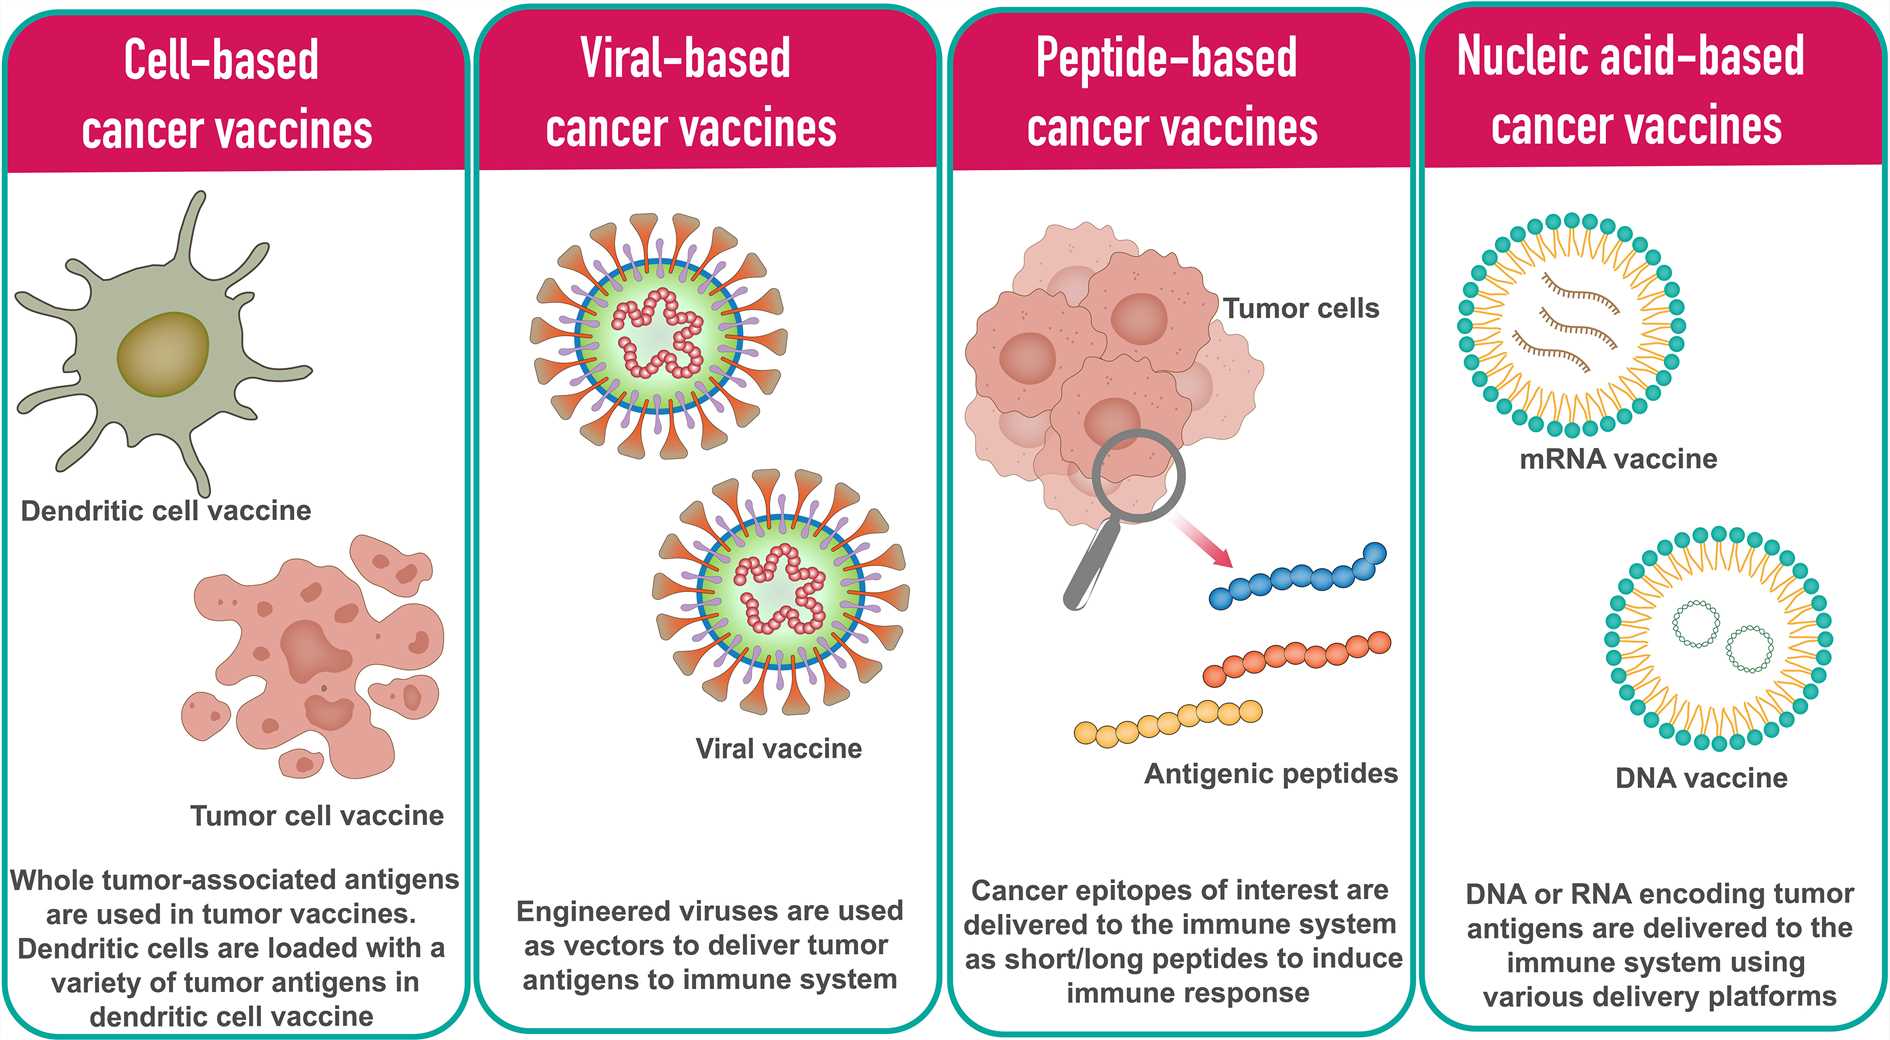 Different types of cancer vaccine platforms.